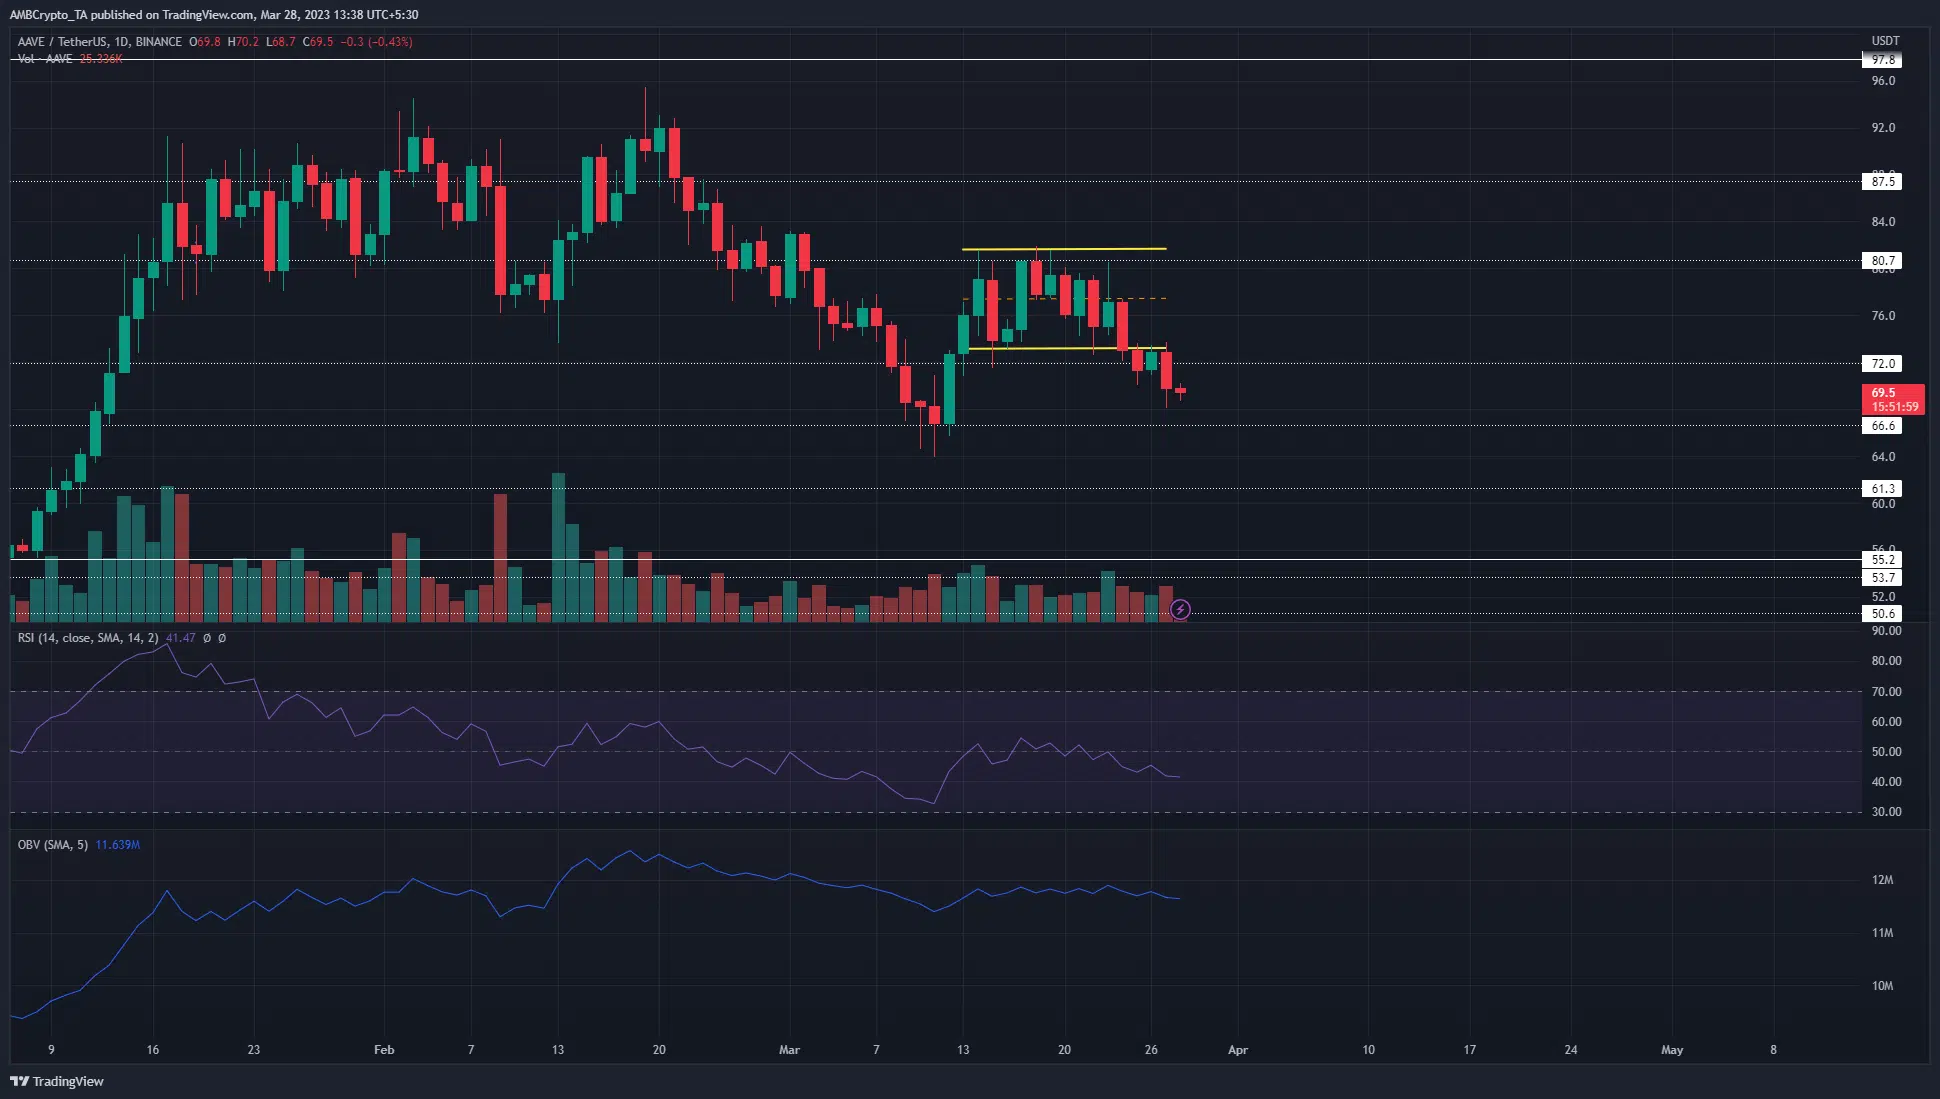 Aave bears take control once more and initiated a downtrend